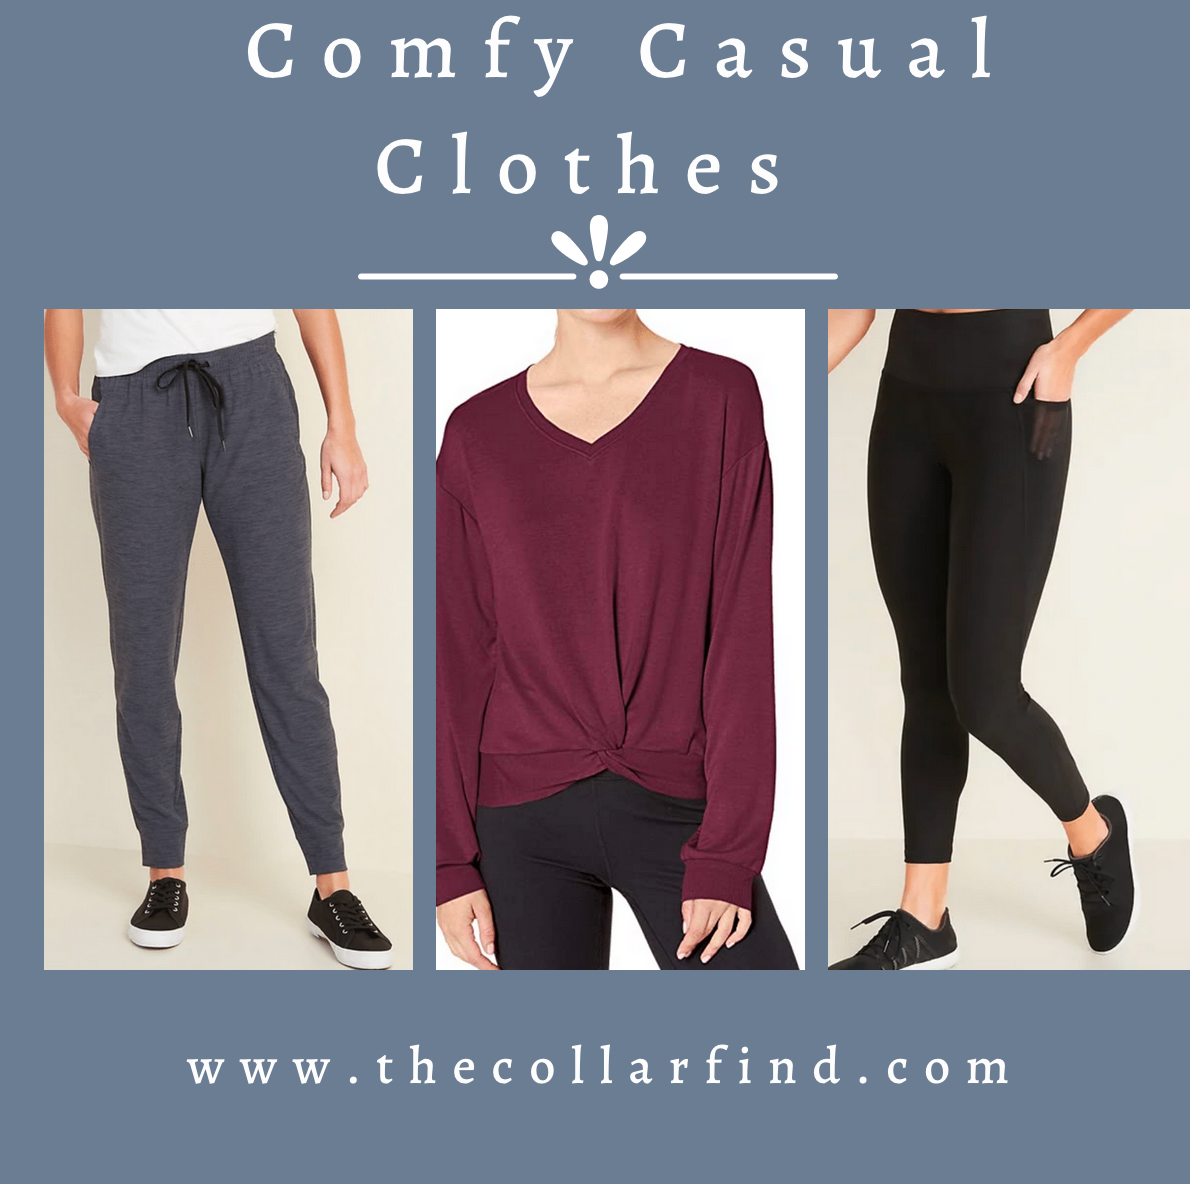 Cute Casual Clothes:Work Out/Lounge Wear